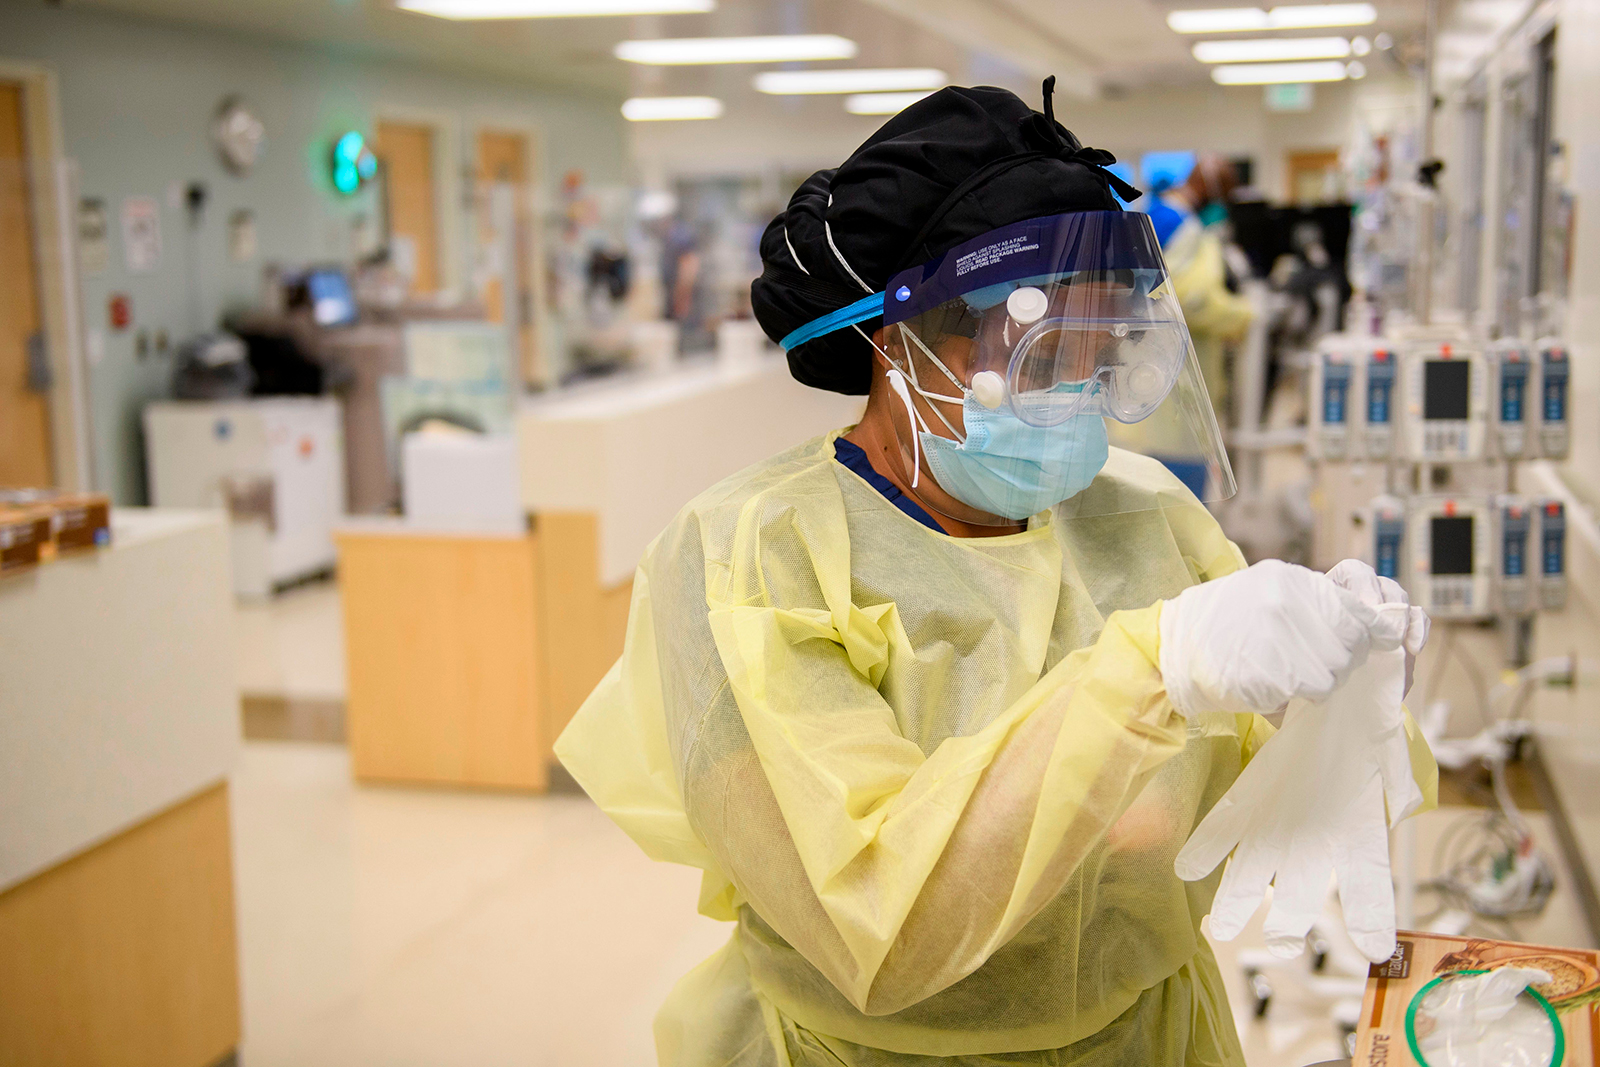 A nurse dons personal protective equipment to attend to patients in a Covid-19 intensive care unit at Martin Luther King Jr. Community Hospital on January 6, in the Willowbrook neighborhood of Los Angeles.